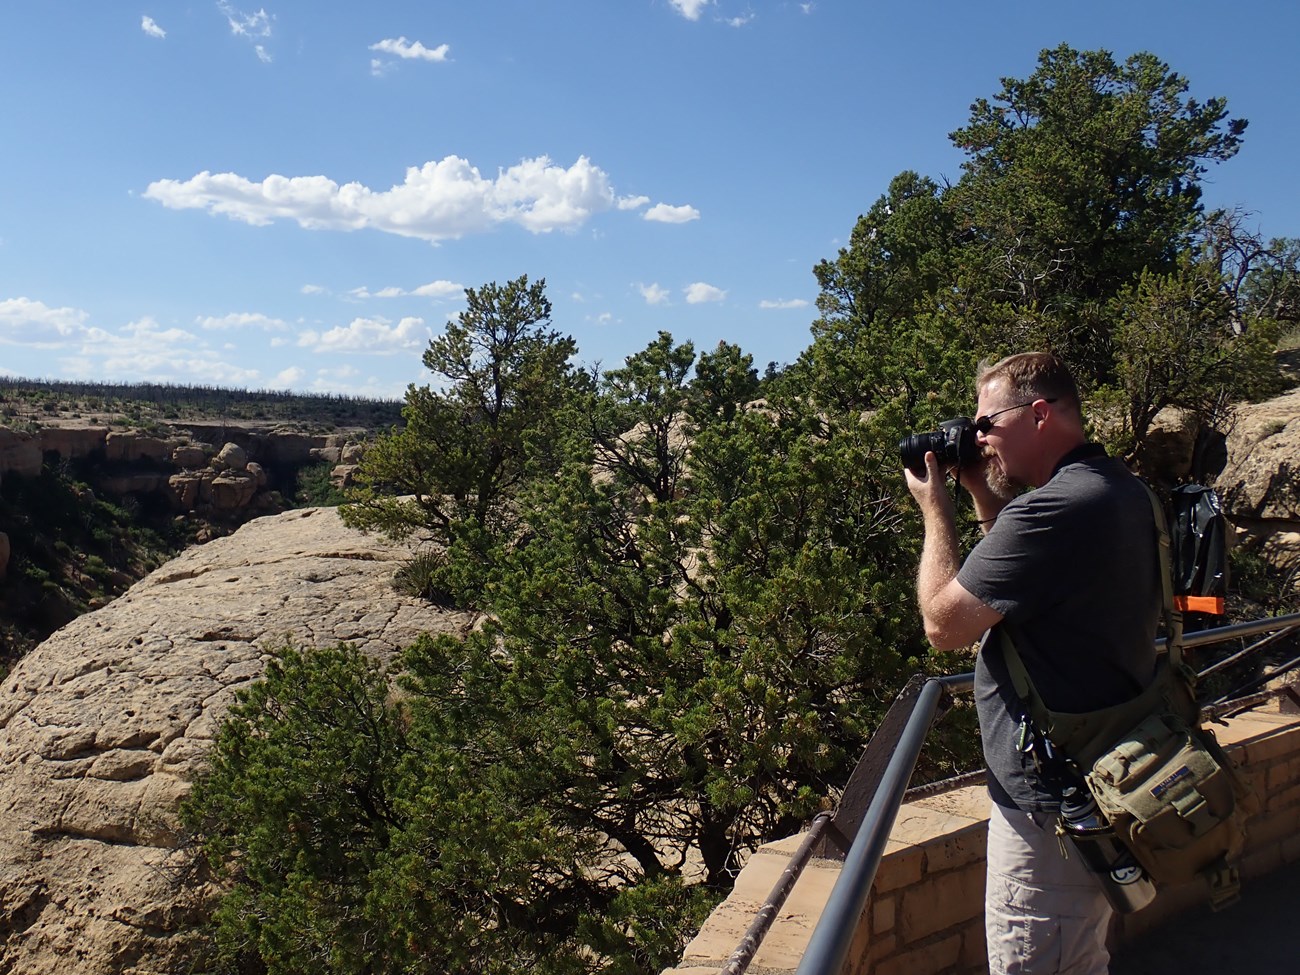 A man uses his camera to capture a scenic vista.